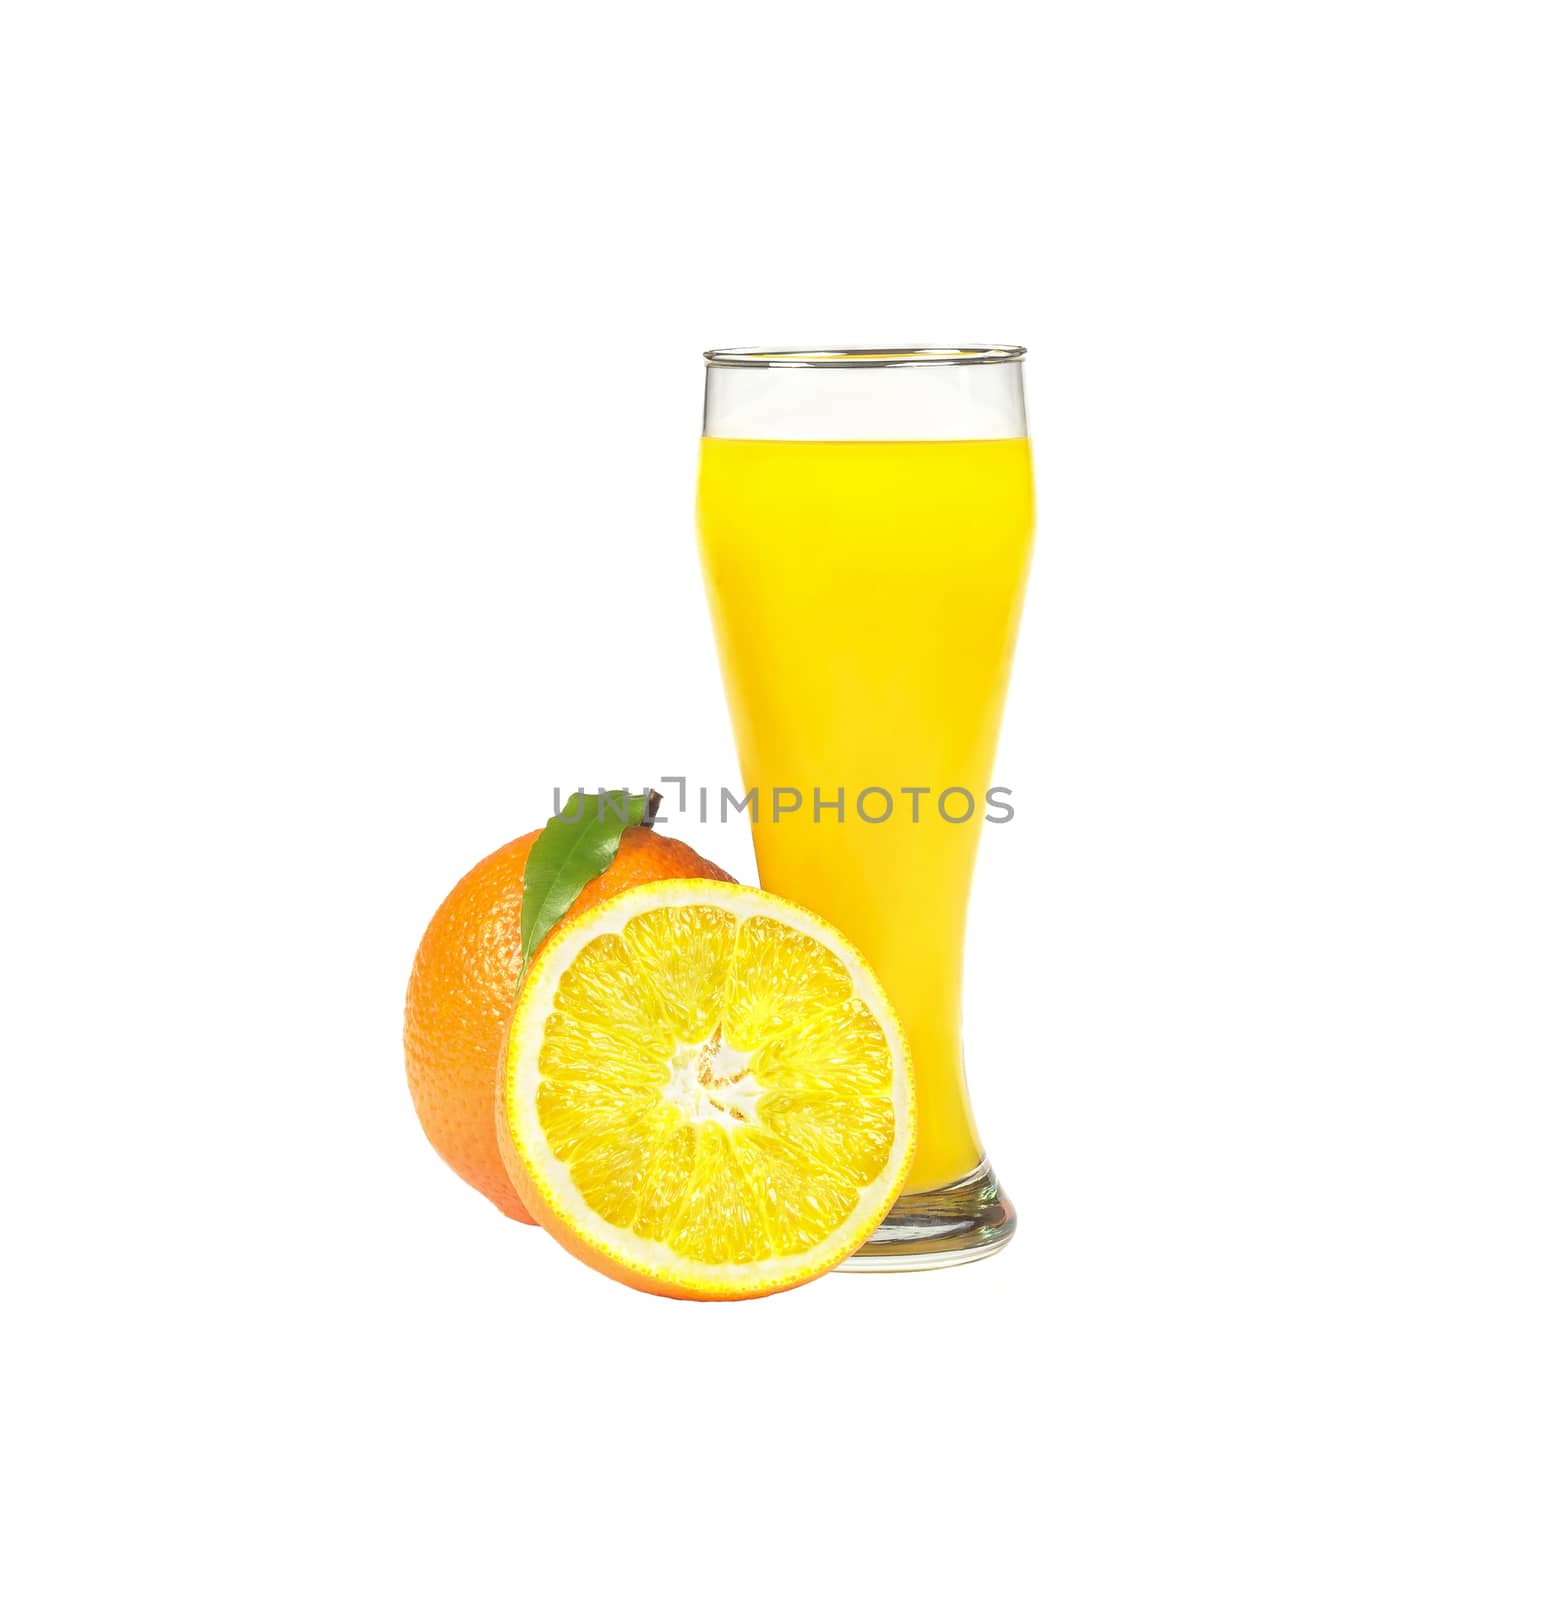 Oranges and glass of orange juice on white background by Grommik